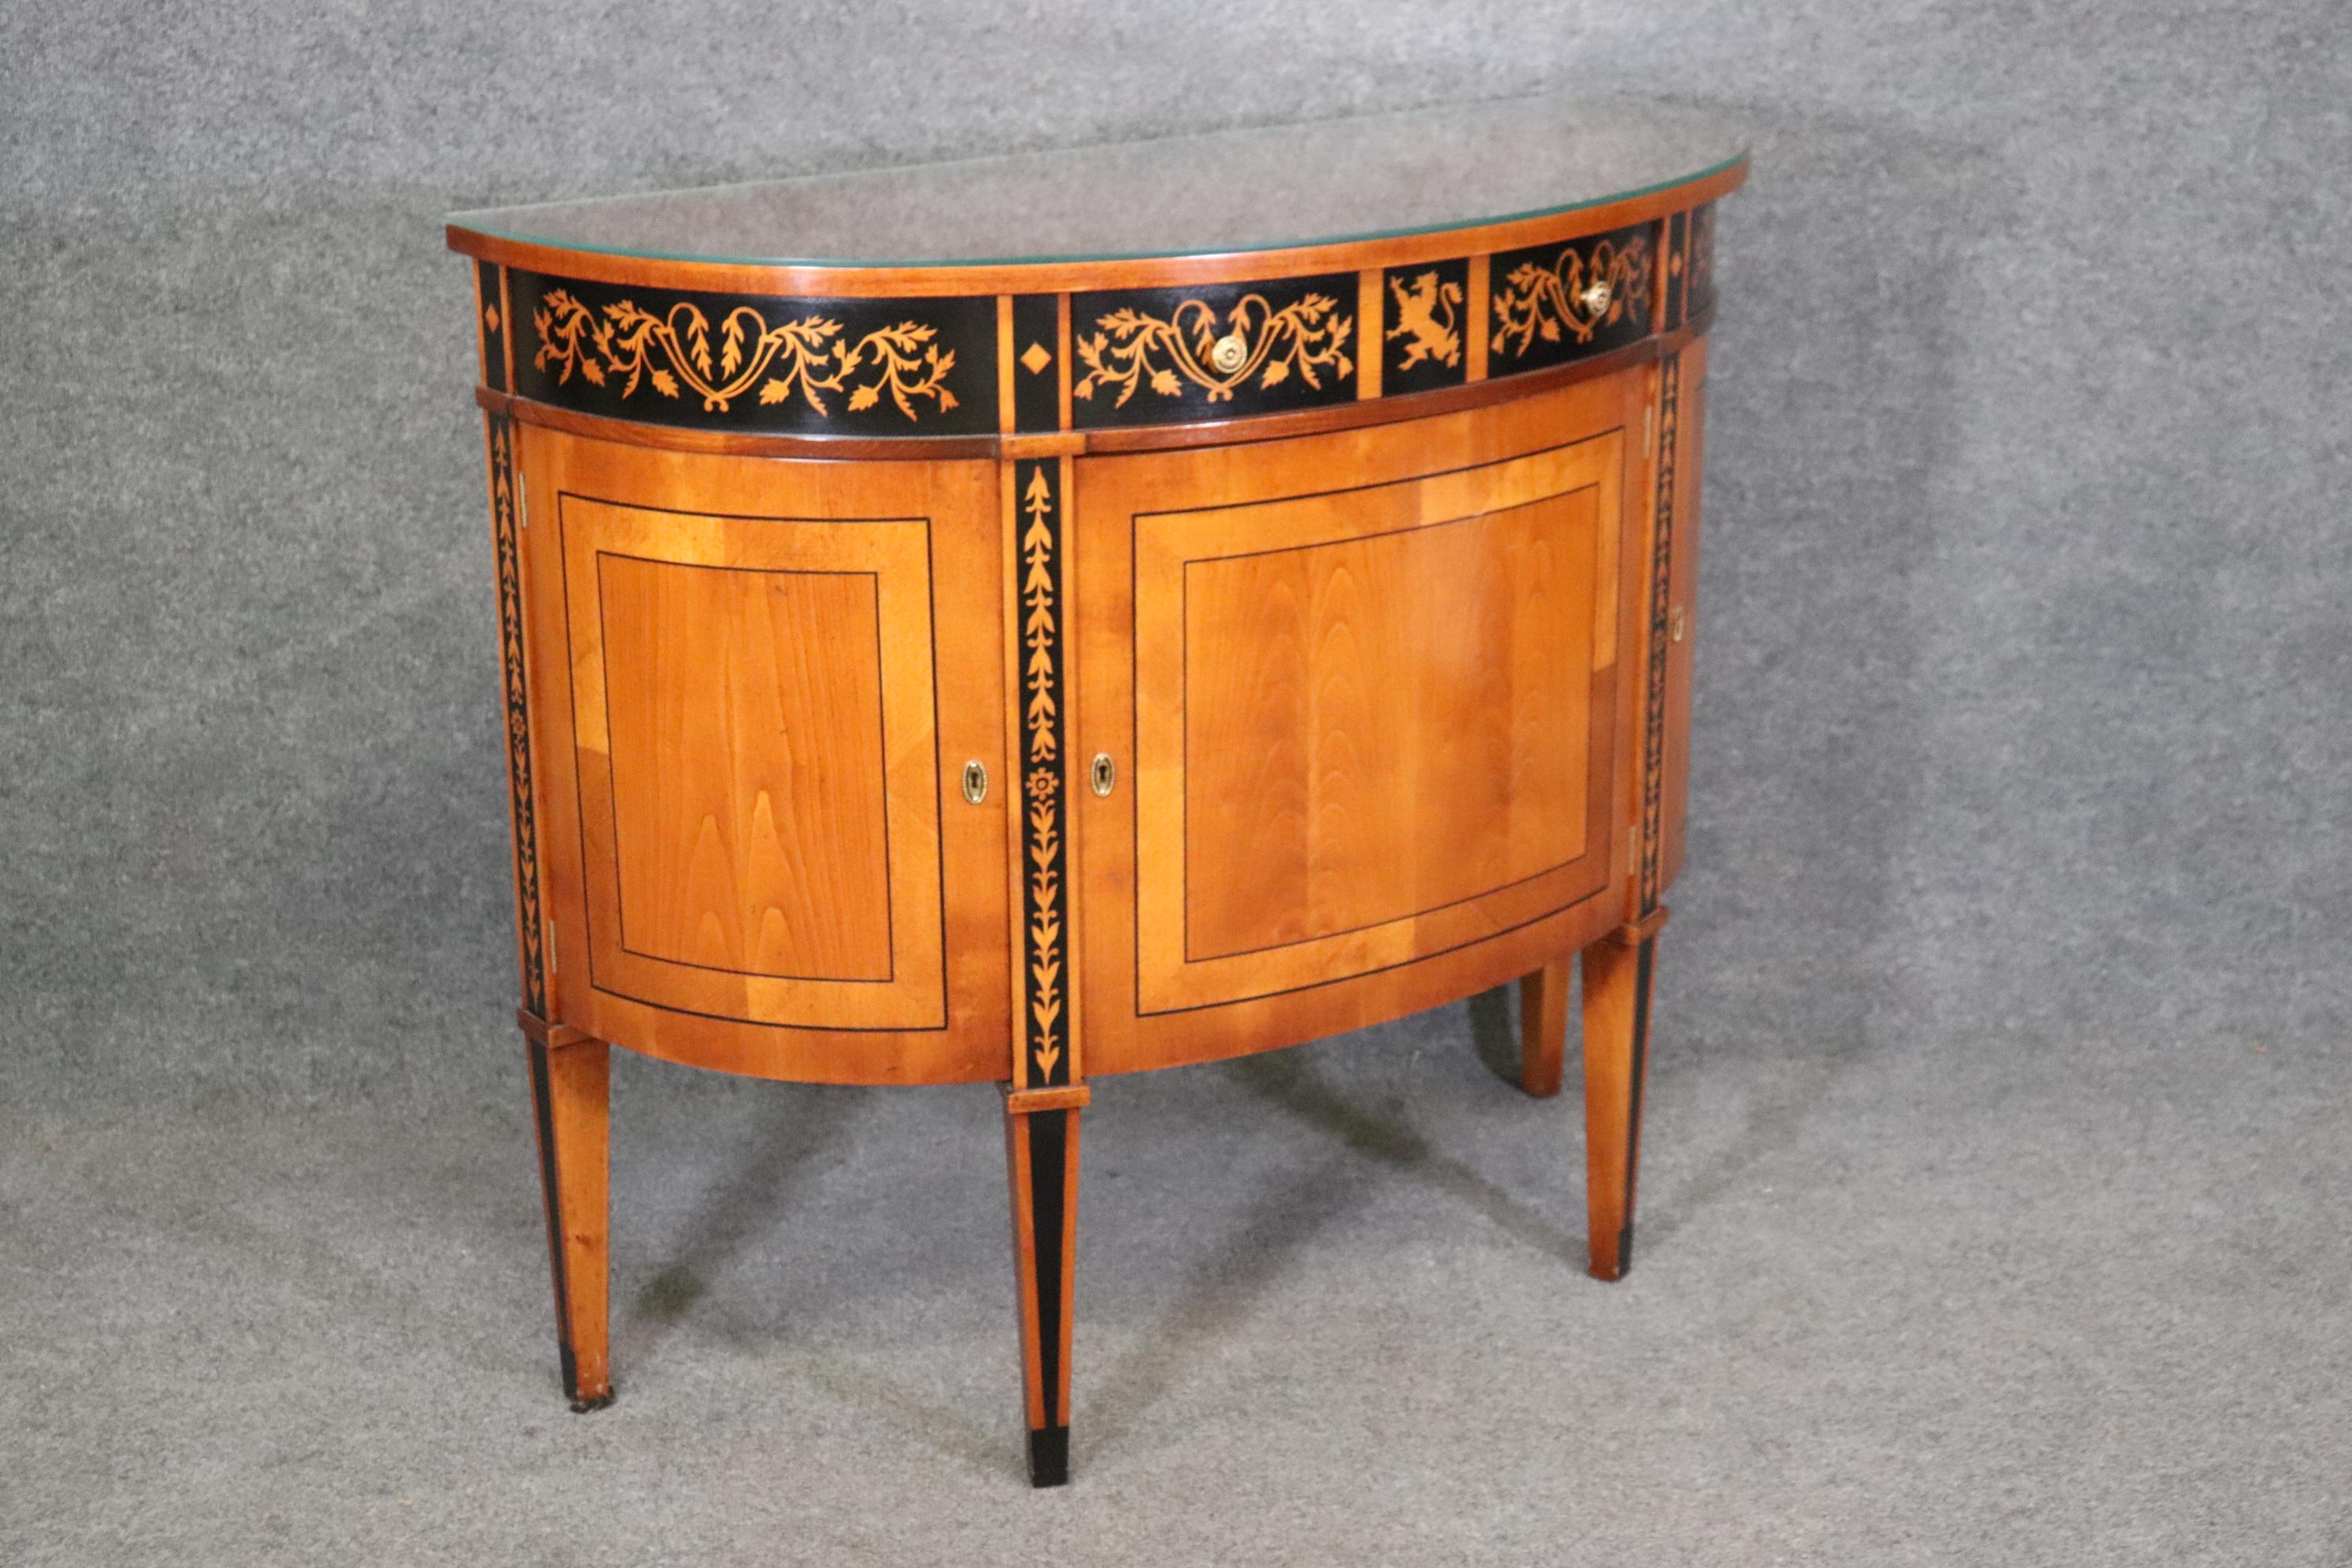 This is a Directoire style Italian-made by Baggio, demilune commode that has inlaid lions and foliage over a cherry case. The simplicity is beautiful and yet very warm and beautiful. The commode measures 44 wide x 37.5 tall x 18 deep and dates to